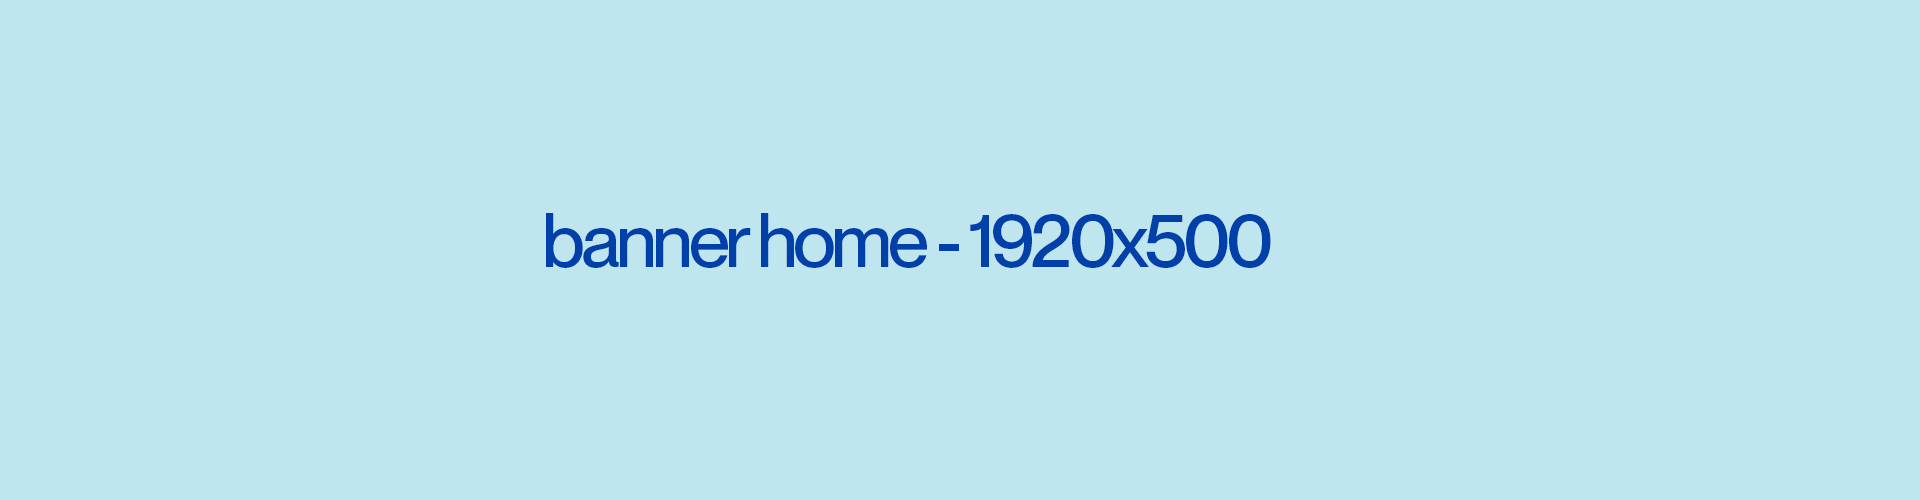 banner_home_1920x500